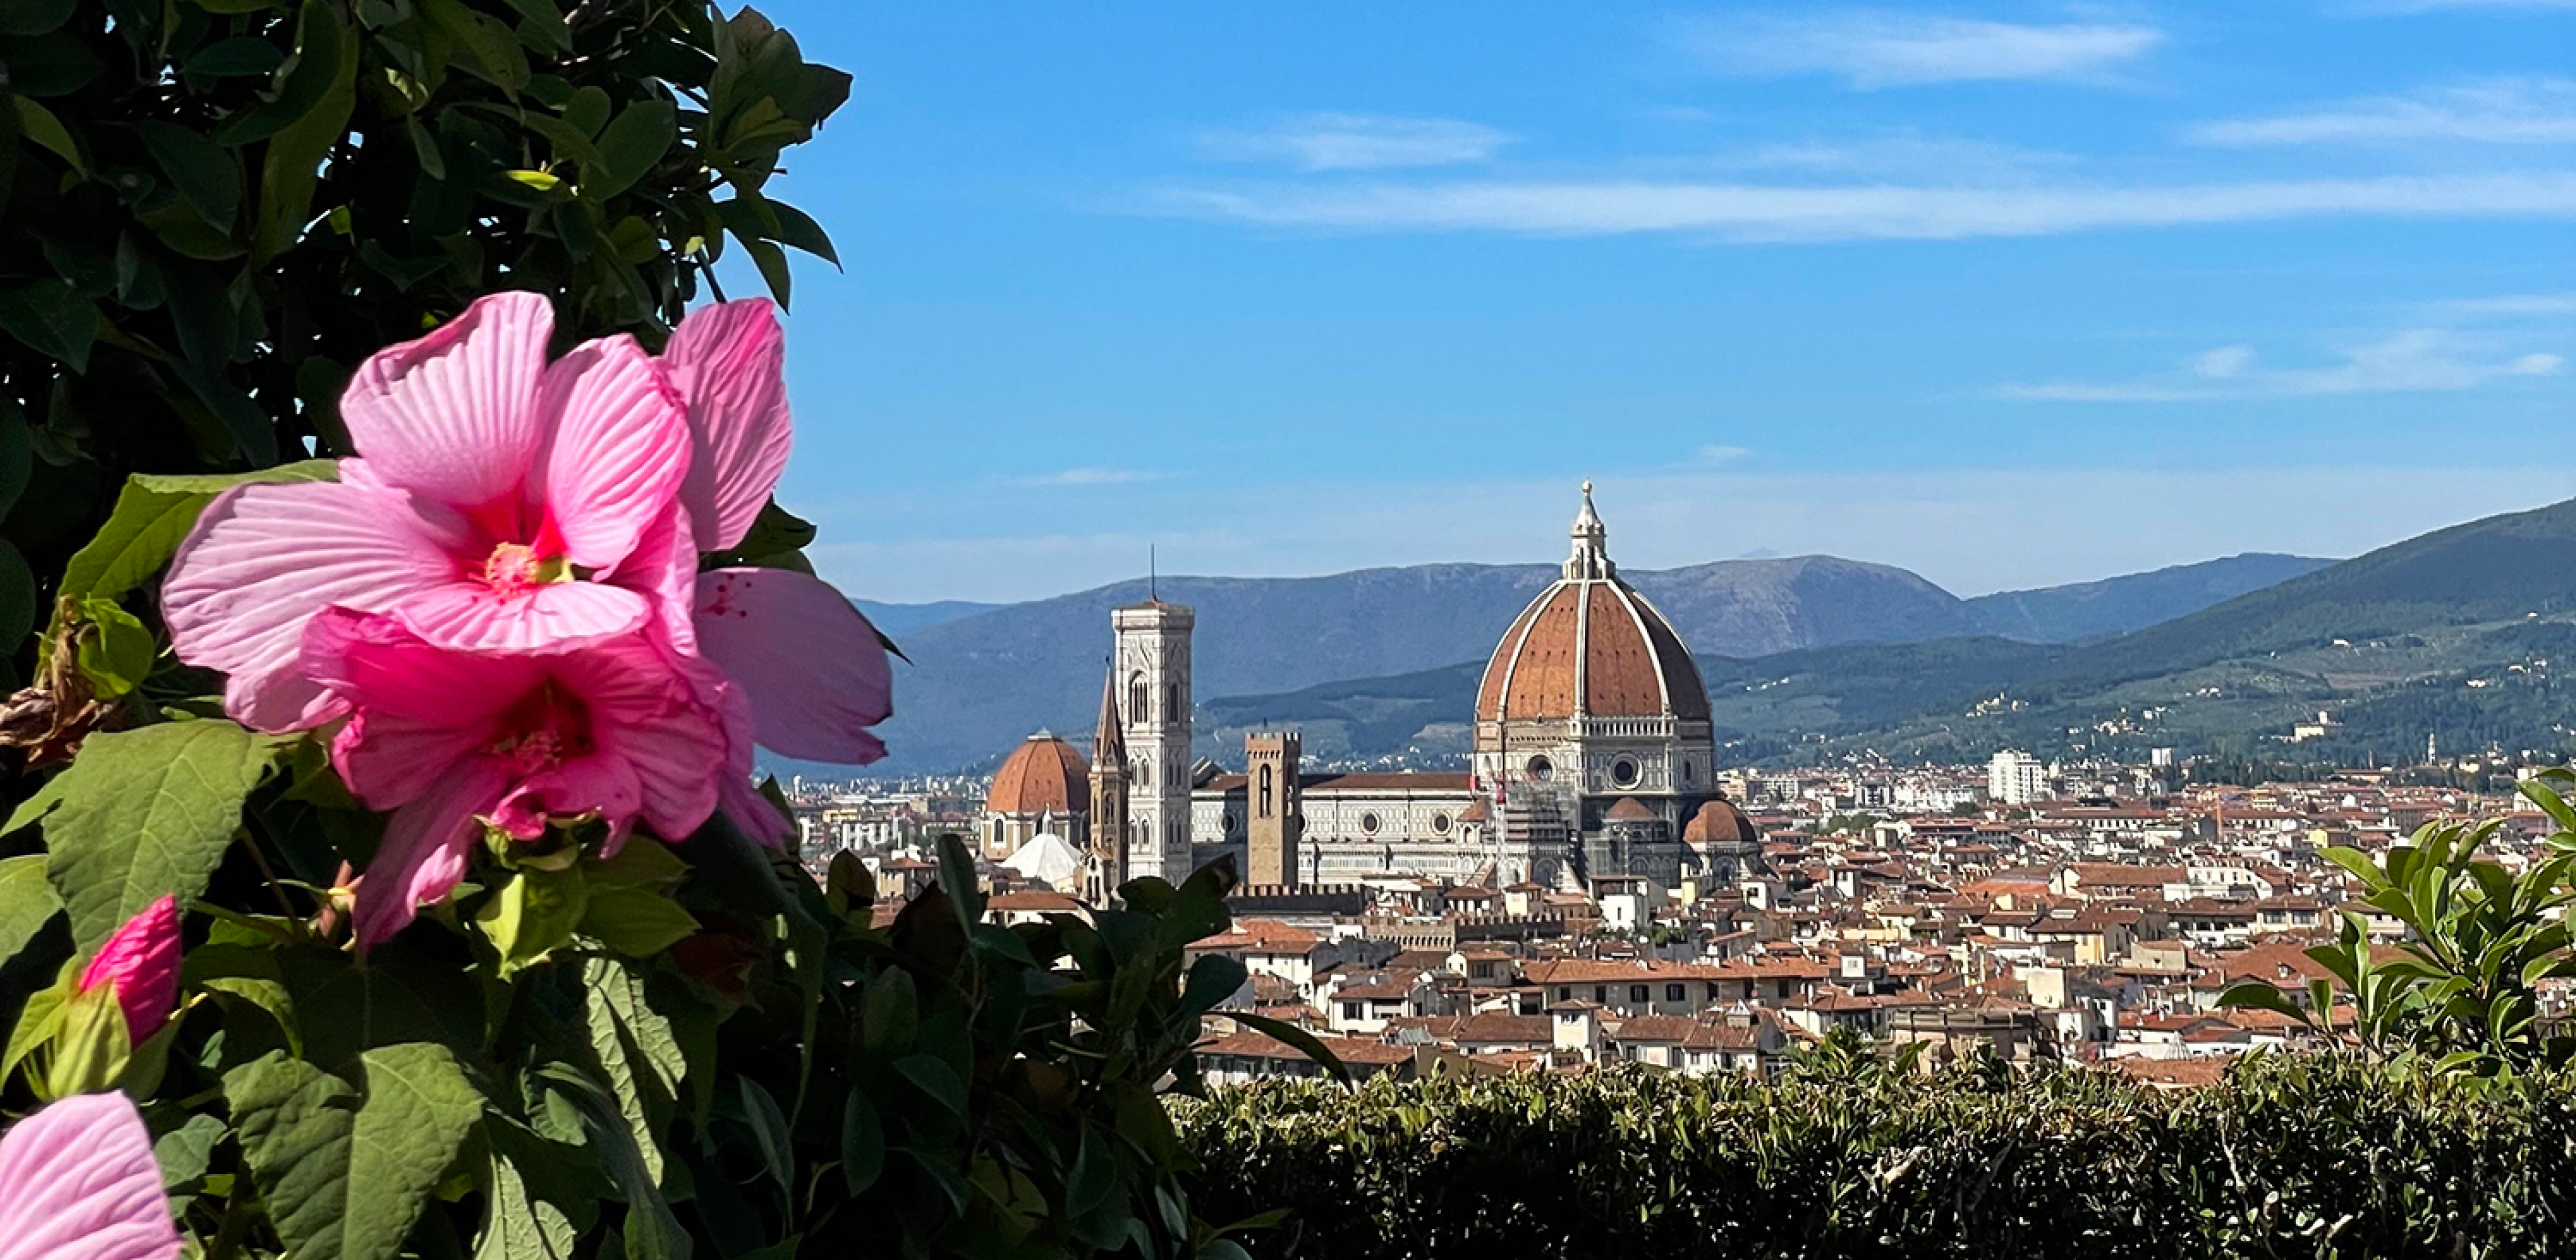 the duomo of florence with flowers in the foreground